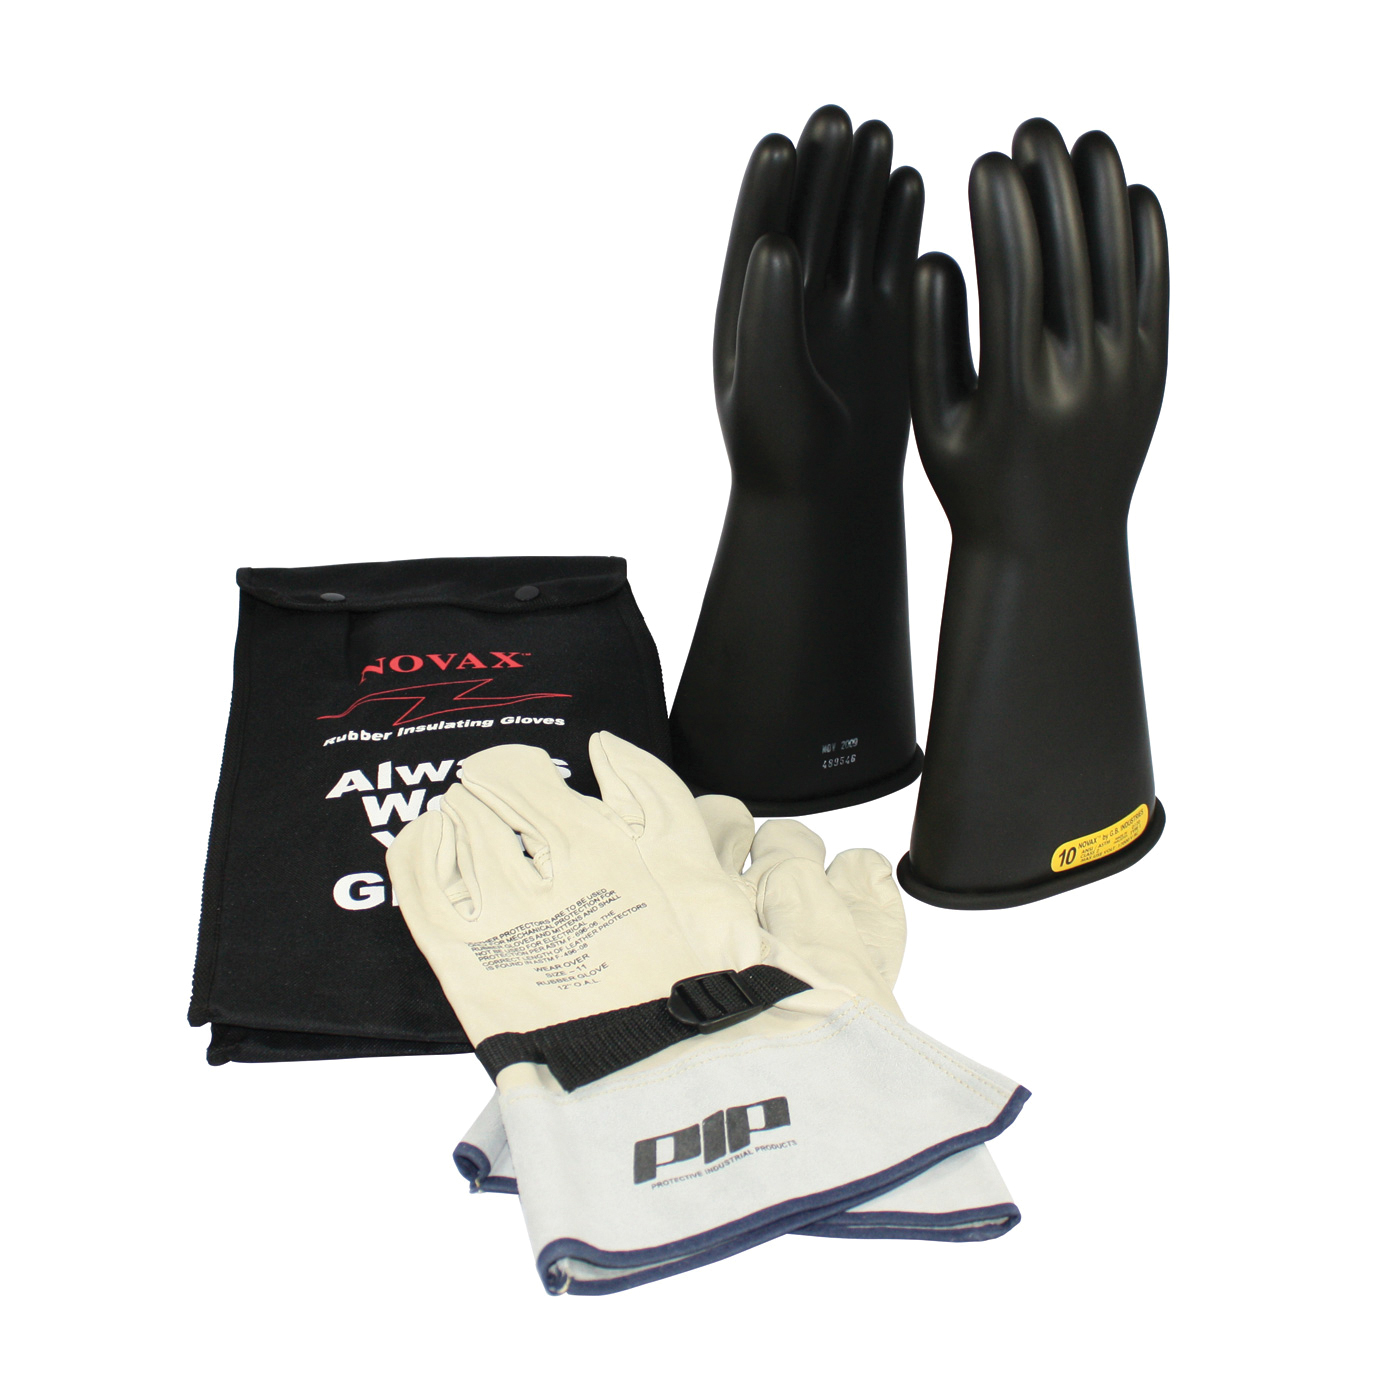 Novax® 150-SK-2/8-KIT Insulating Unisex Electrical Safety Gloves Kit, SZ 8, Cowhide Leather/Natural Rubber, Black/Natural, 14 in L, ASTM Class: Class 2, 17000 VAC, 25500 VDC Max Use Voltage